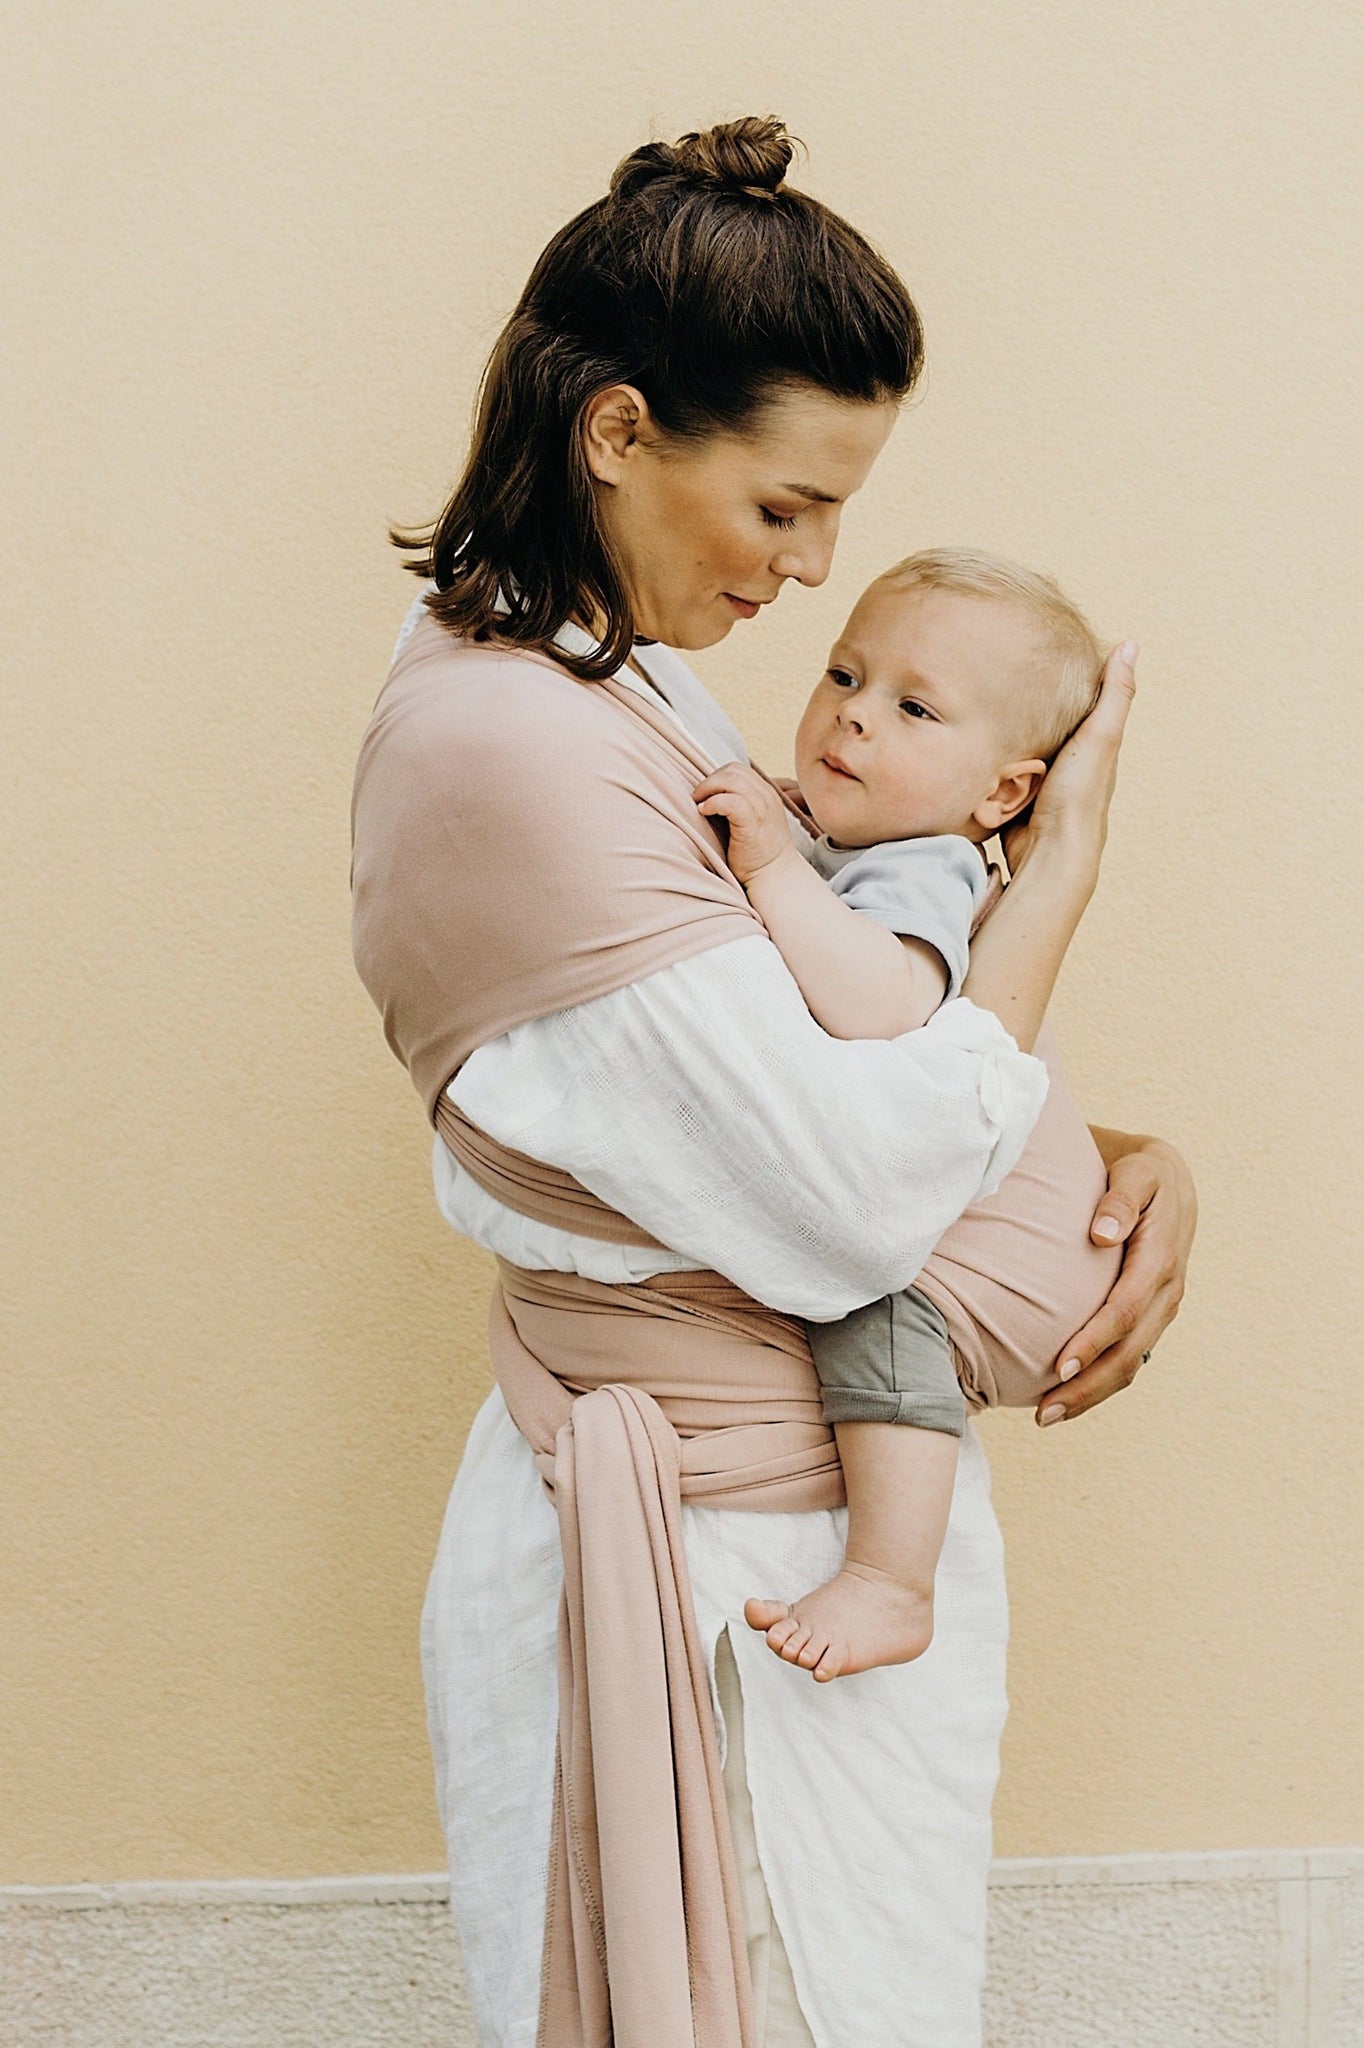 Get the perfect baby wrap for bonding with your little one! Our Boba Serenity Wrap is crafted from a buttery soft, breathable bamboo blend fabric and provides comfort and support for babies up to 35 lbs. Perfect for hands-free snuggling!